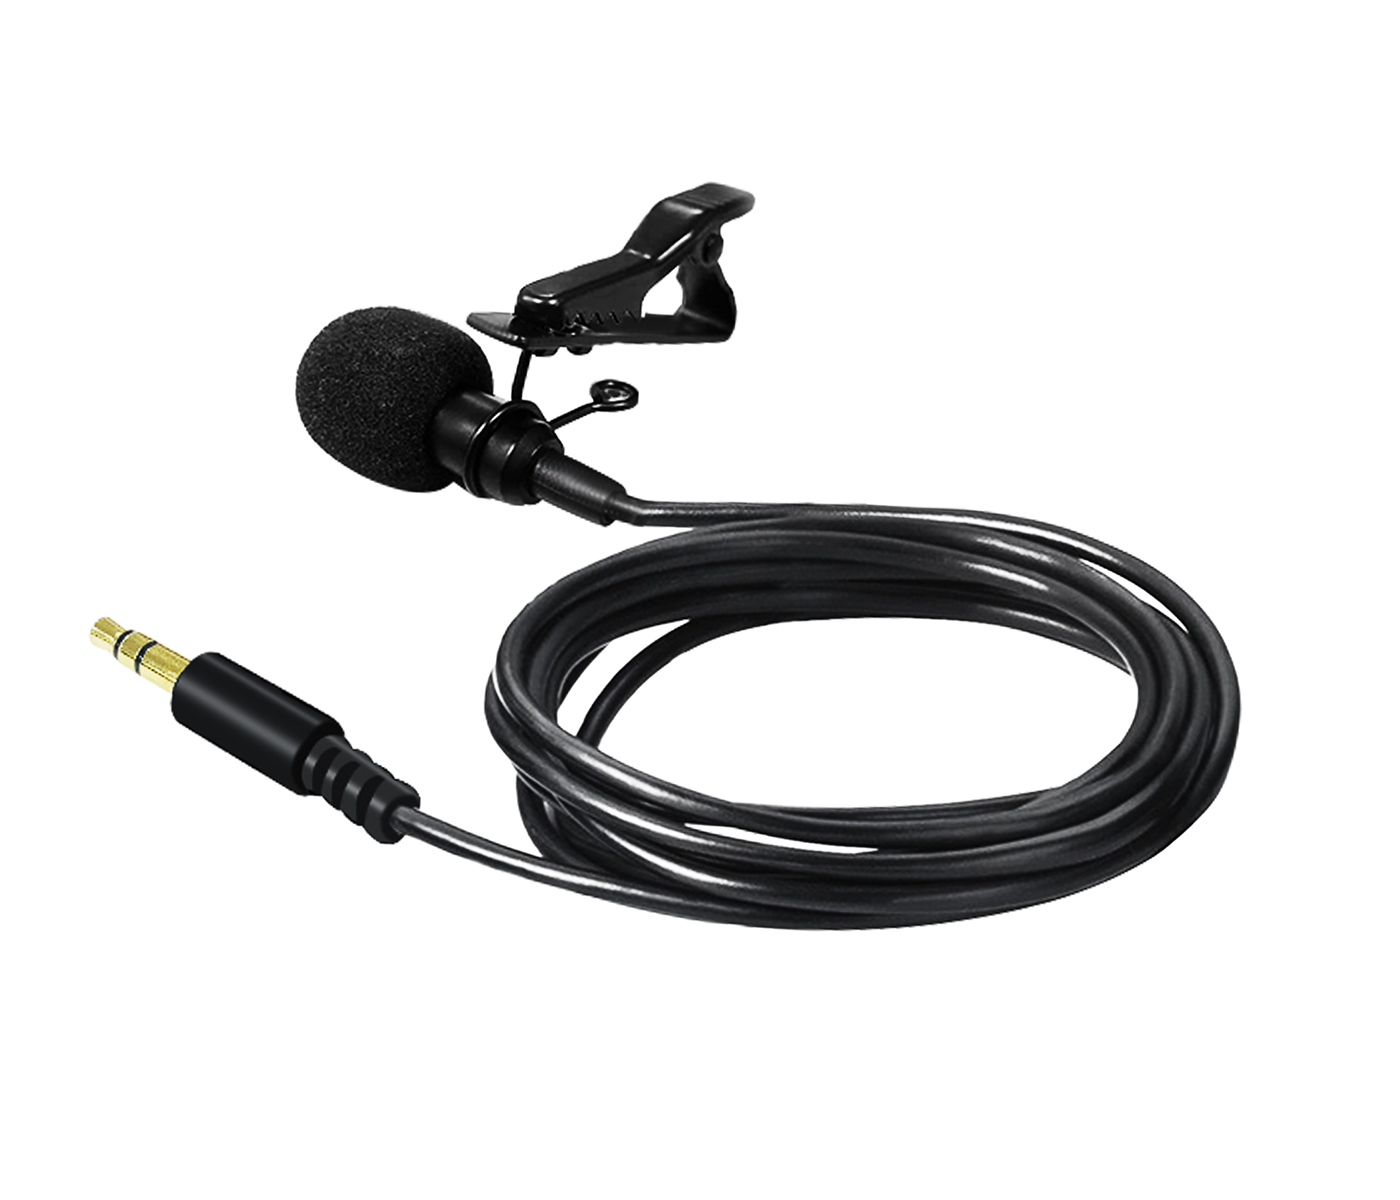 HL-OLM01 Professional Omnidirectional Lavalier Microphone